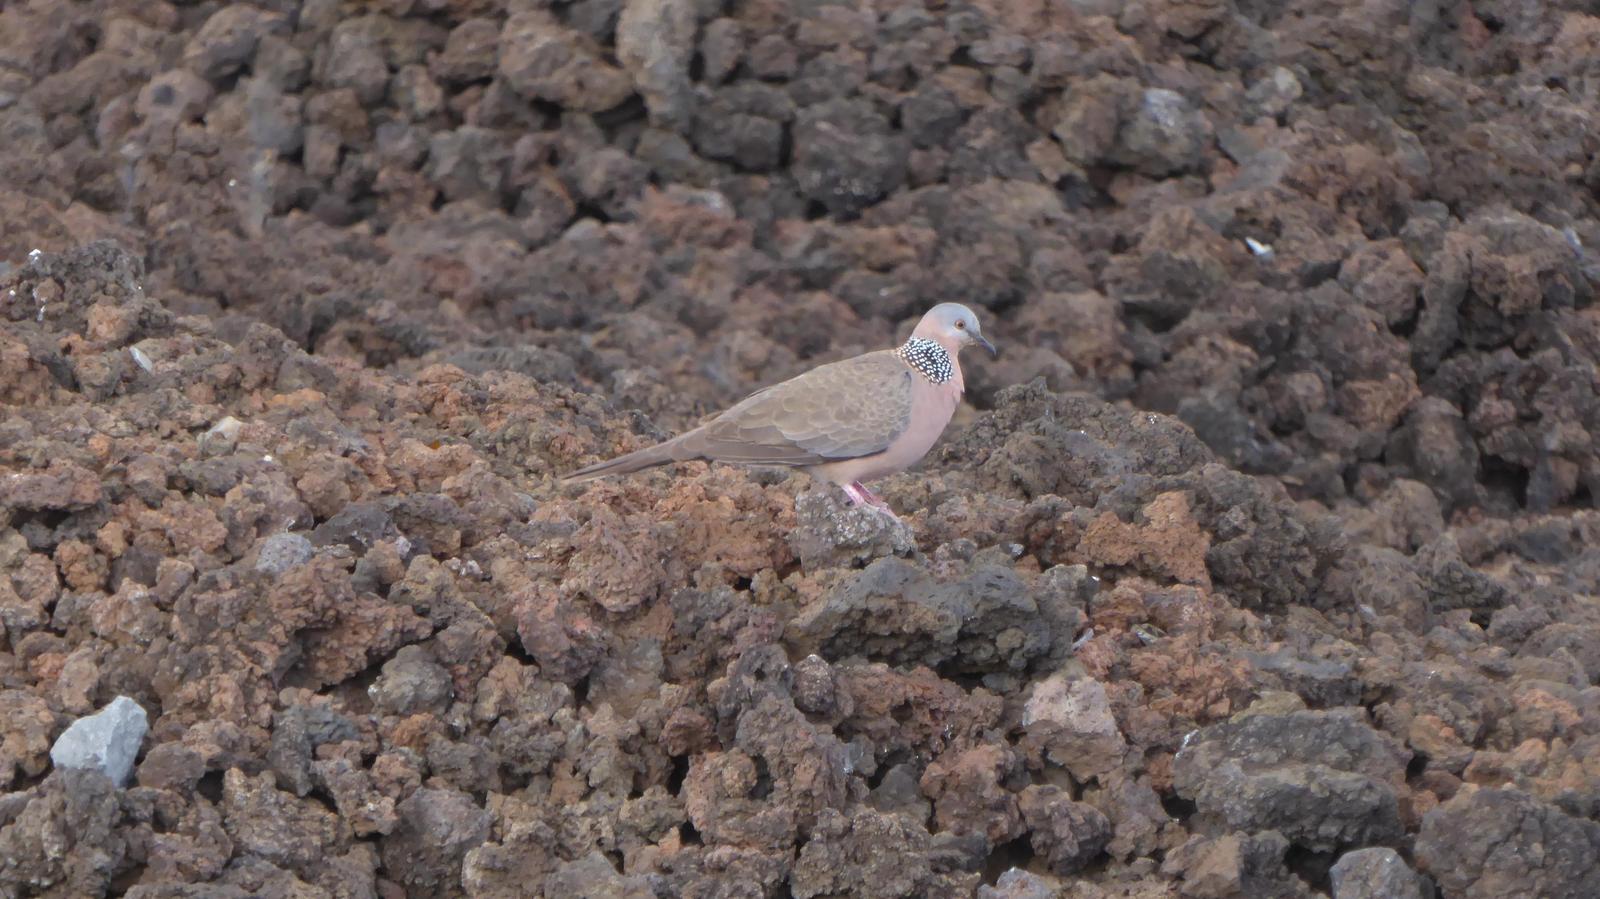 Spotted Dove Photo by Daliel Leite